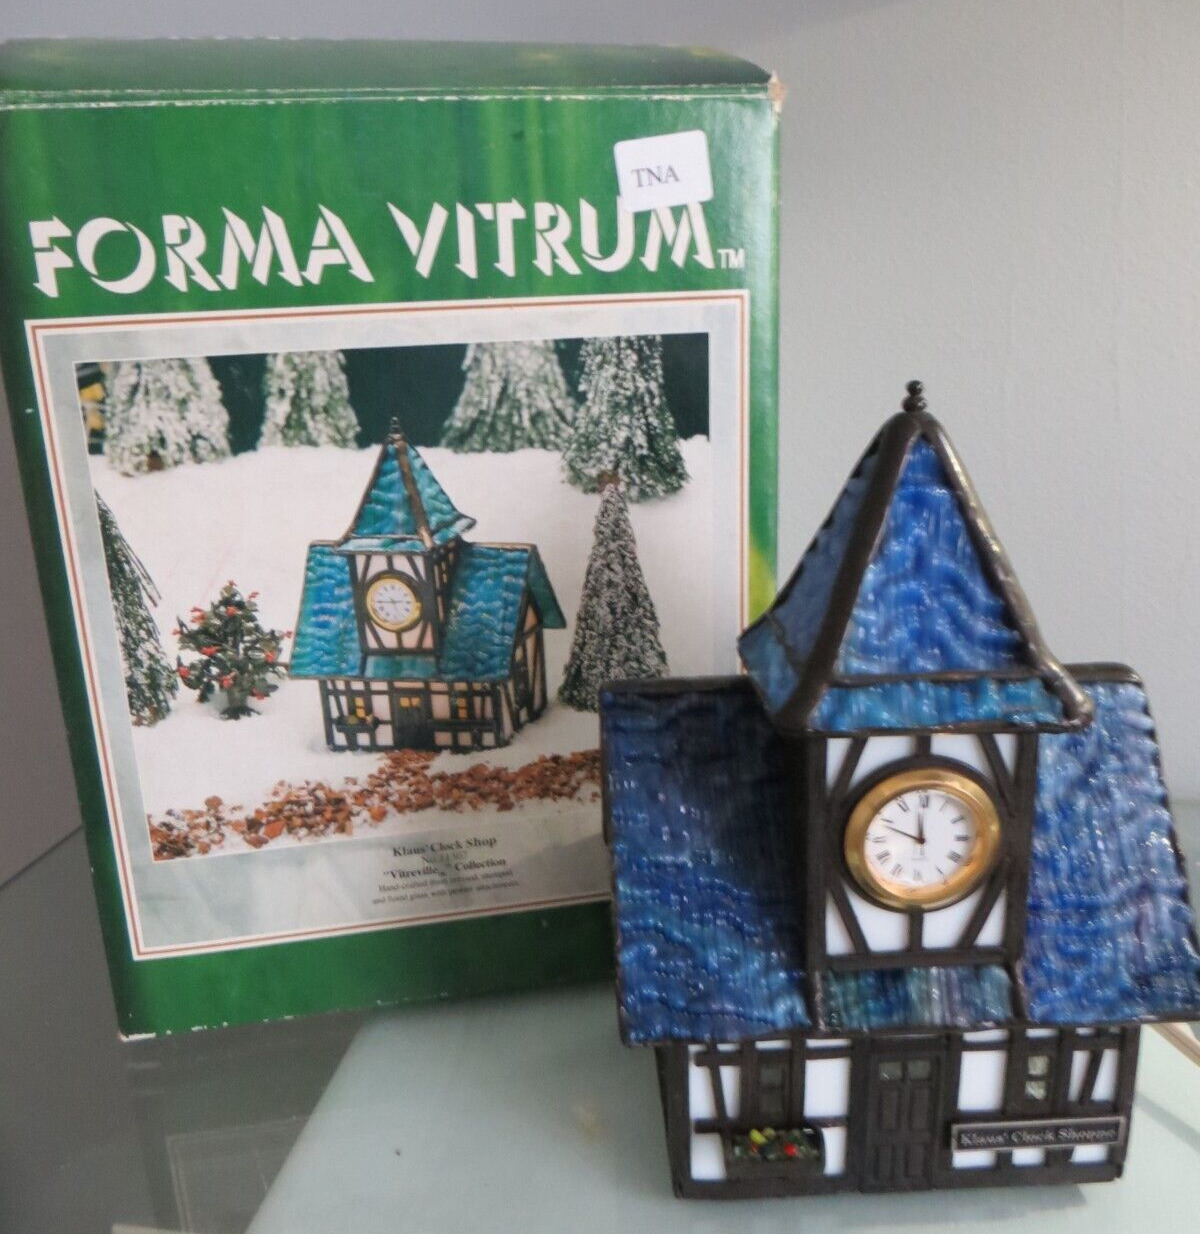 Rare Forma Vitrum Vitreville Klaus Clock Shop Collection Stained Glass House Box